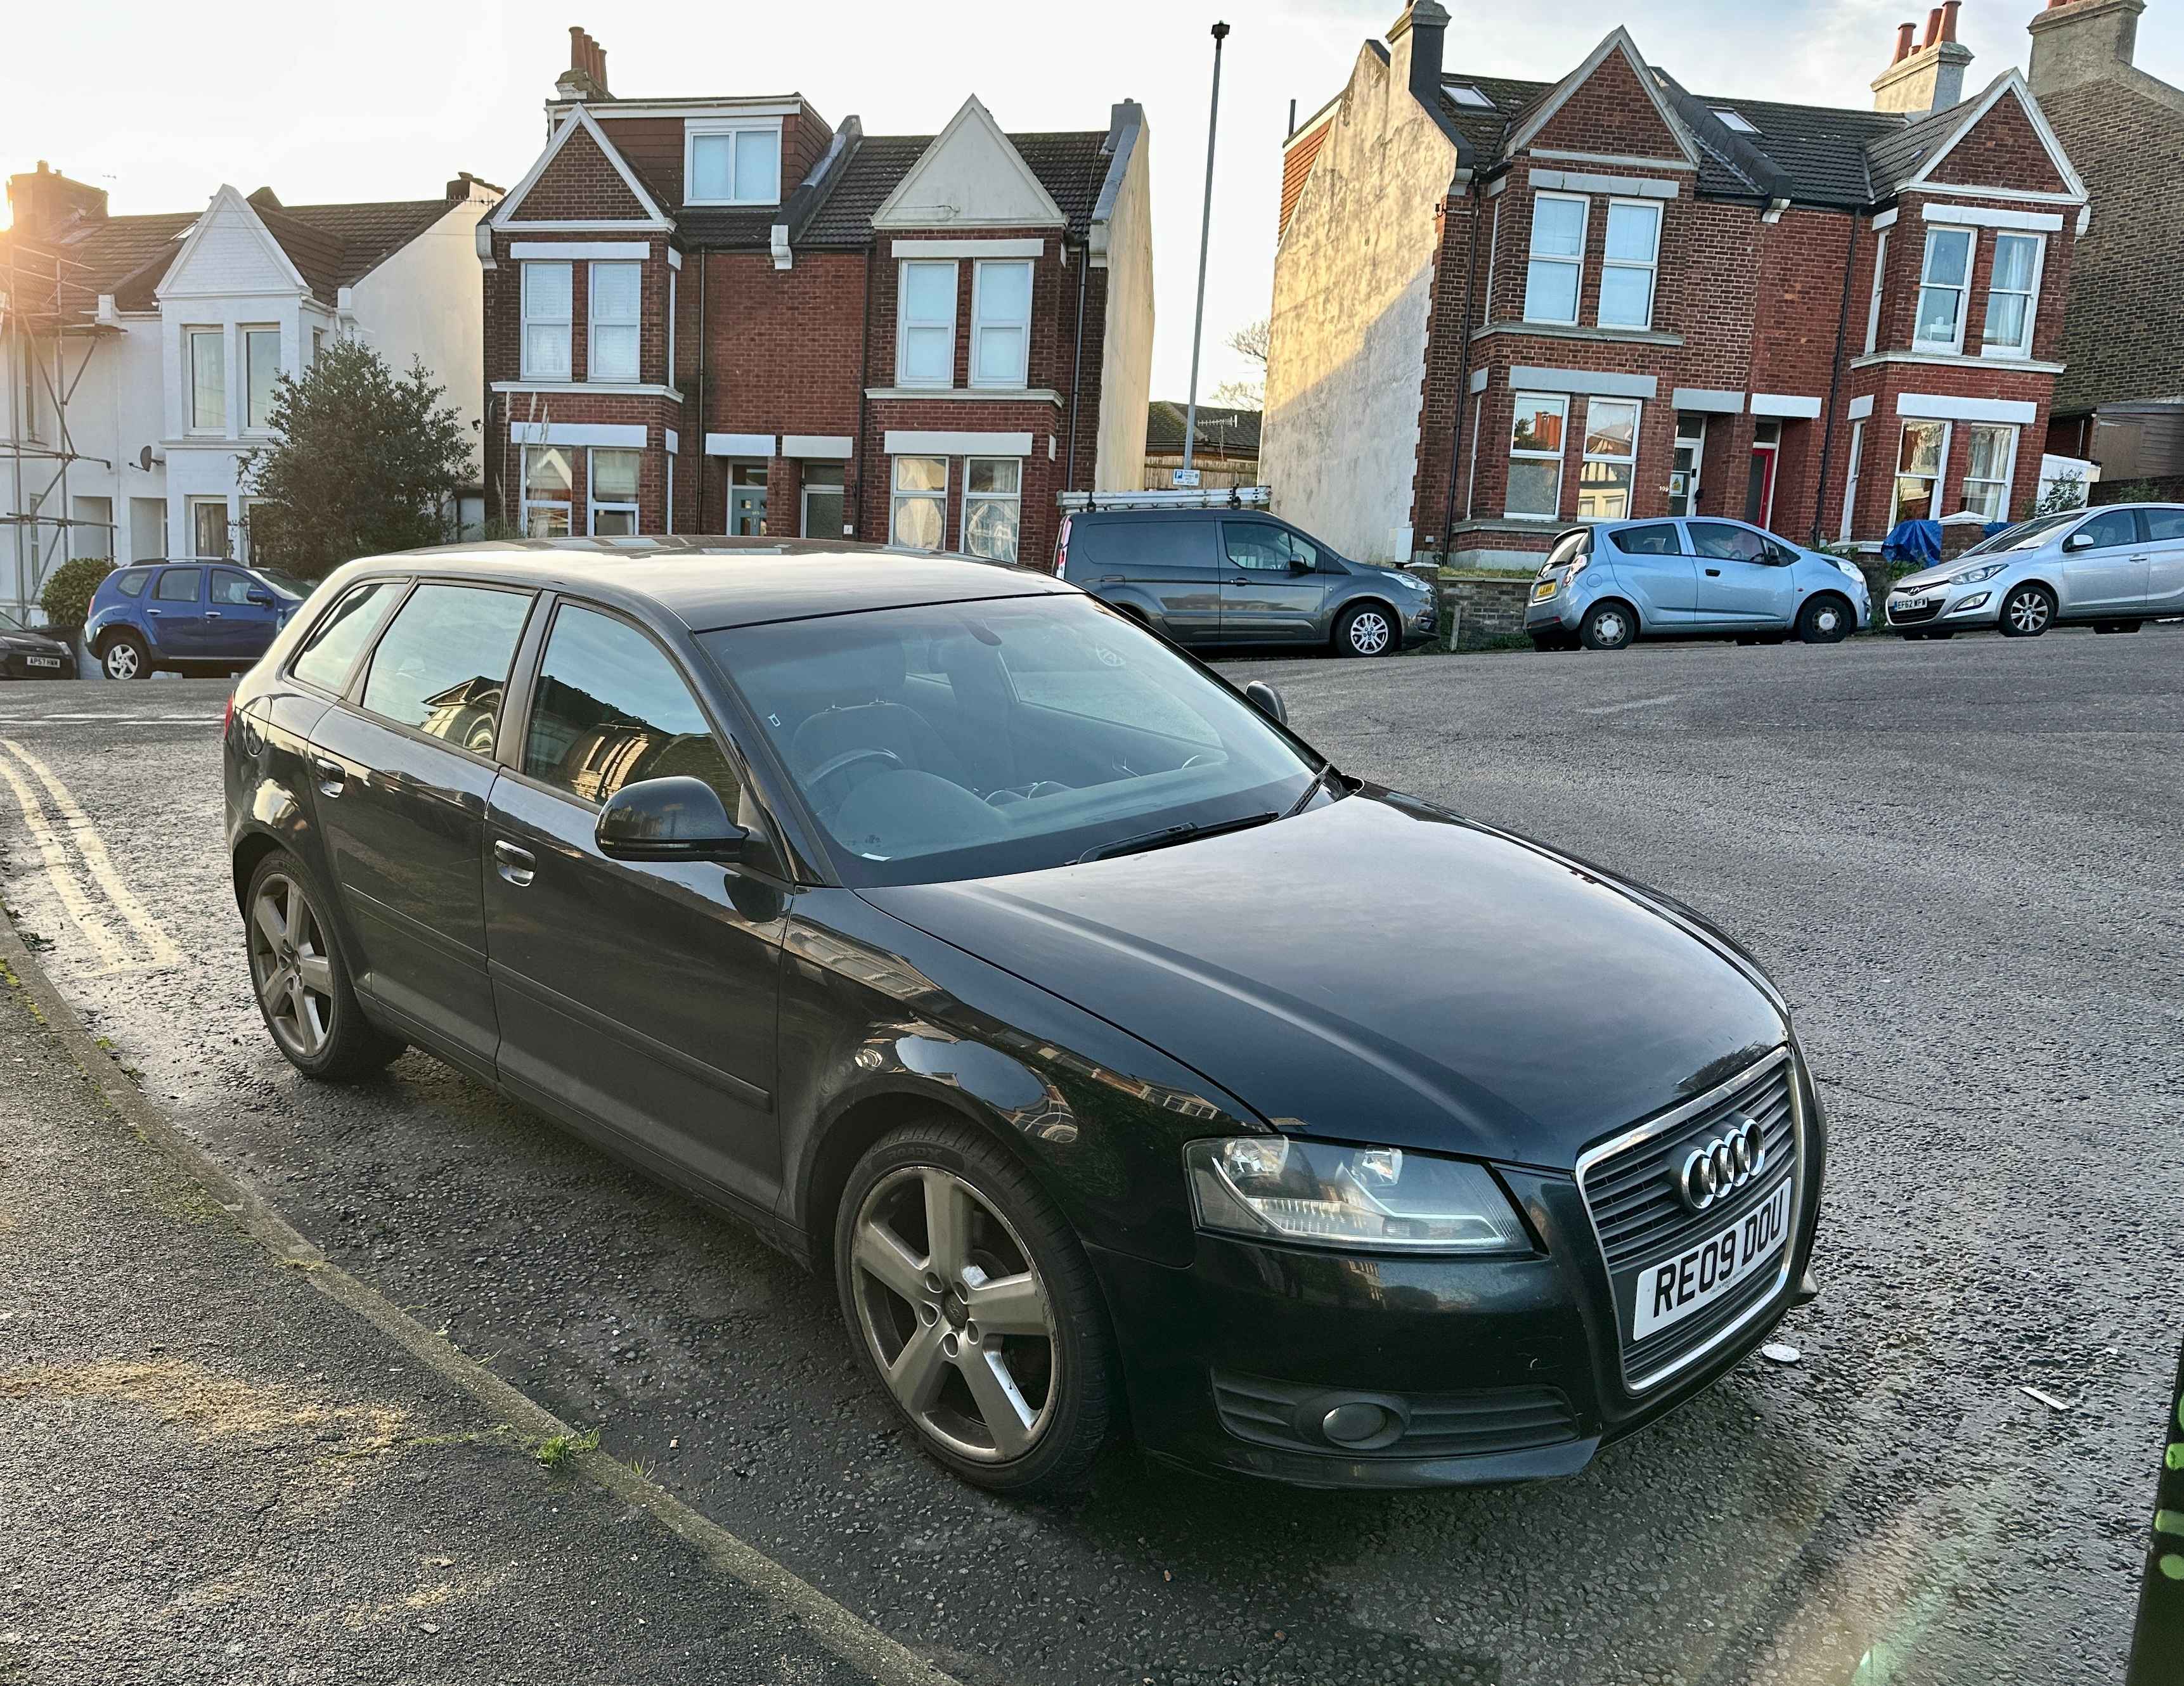 Photograph of RE09 DOU - a Black Audi A3 parked in Hollingdean by a non-resident who uses the local area as part of their Brighton commute. The sixth of six photographs supplied by the residents of Hollingdean.